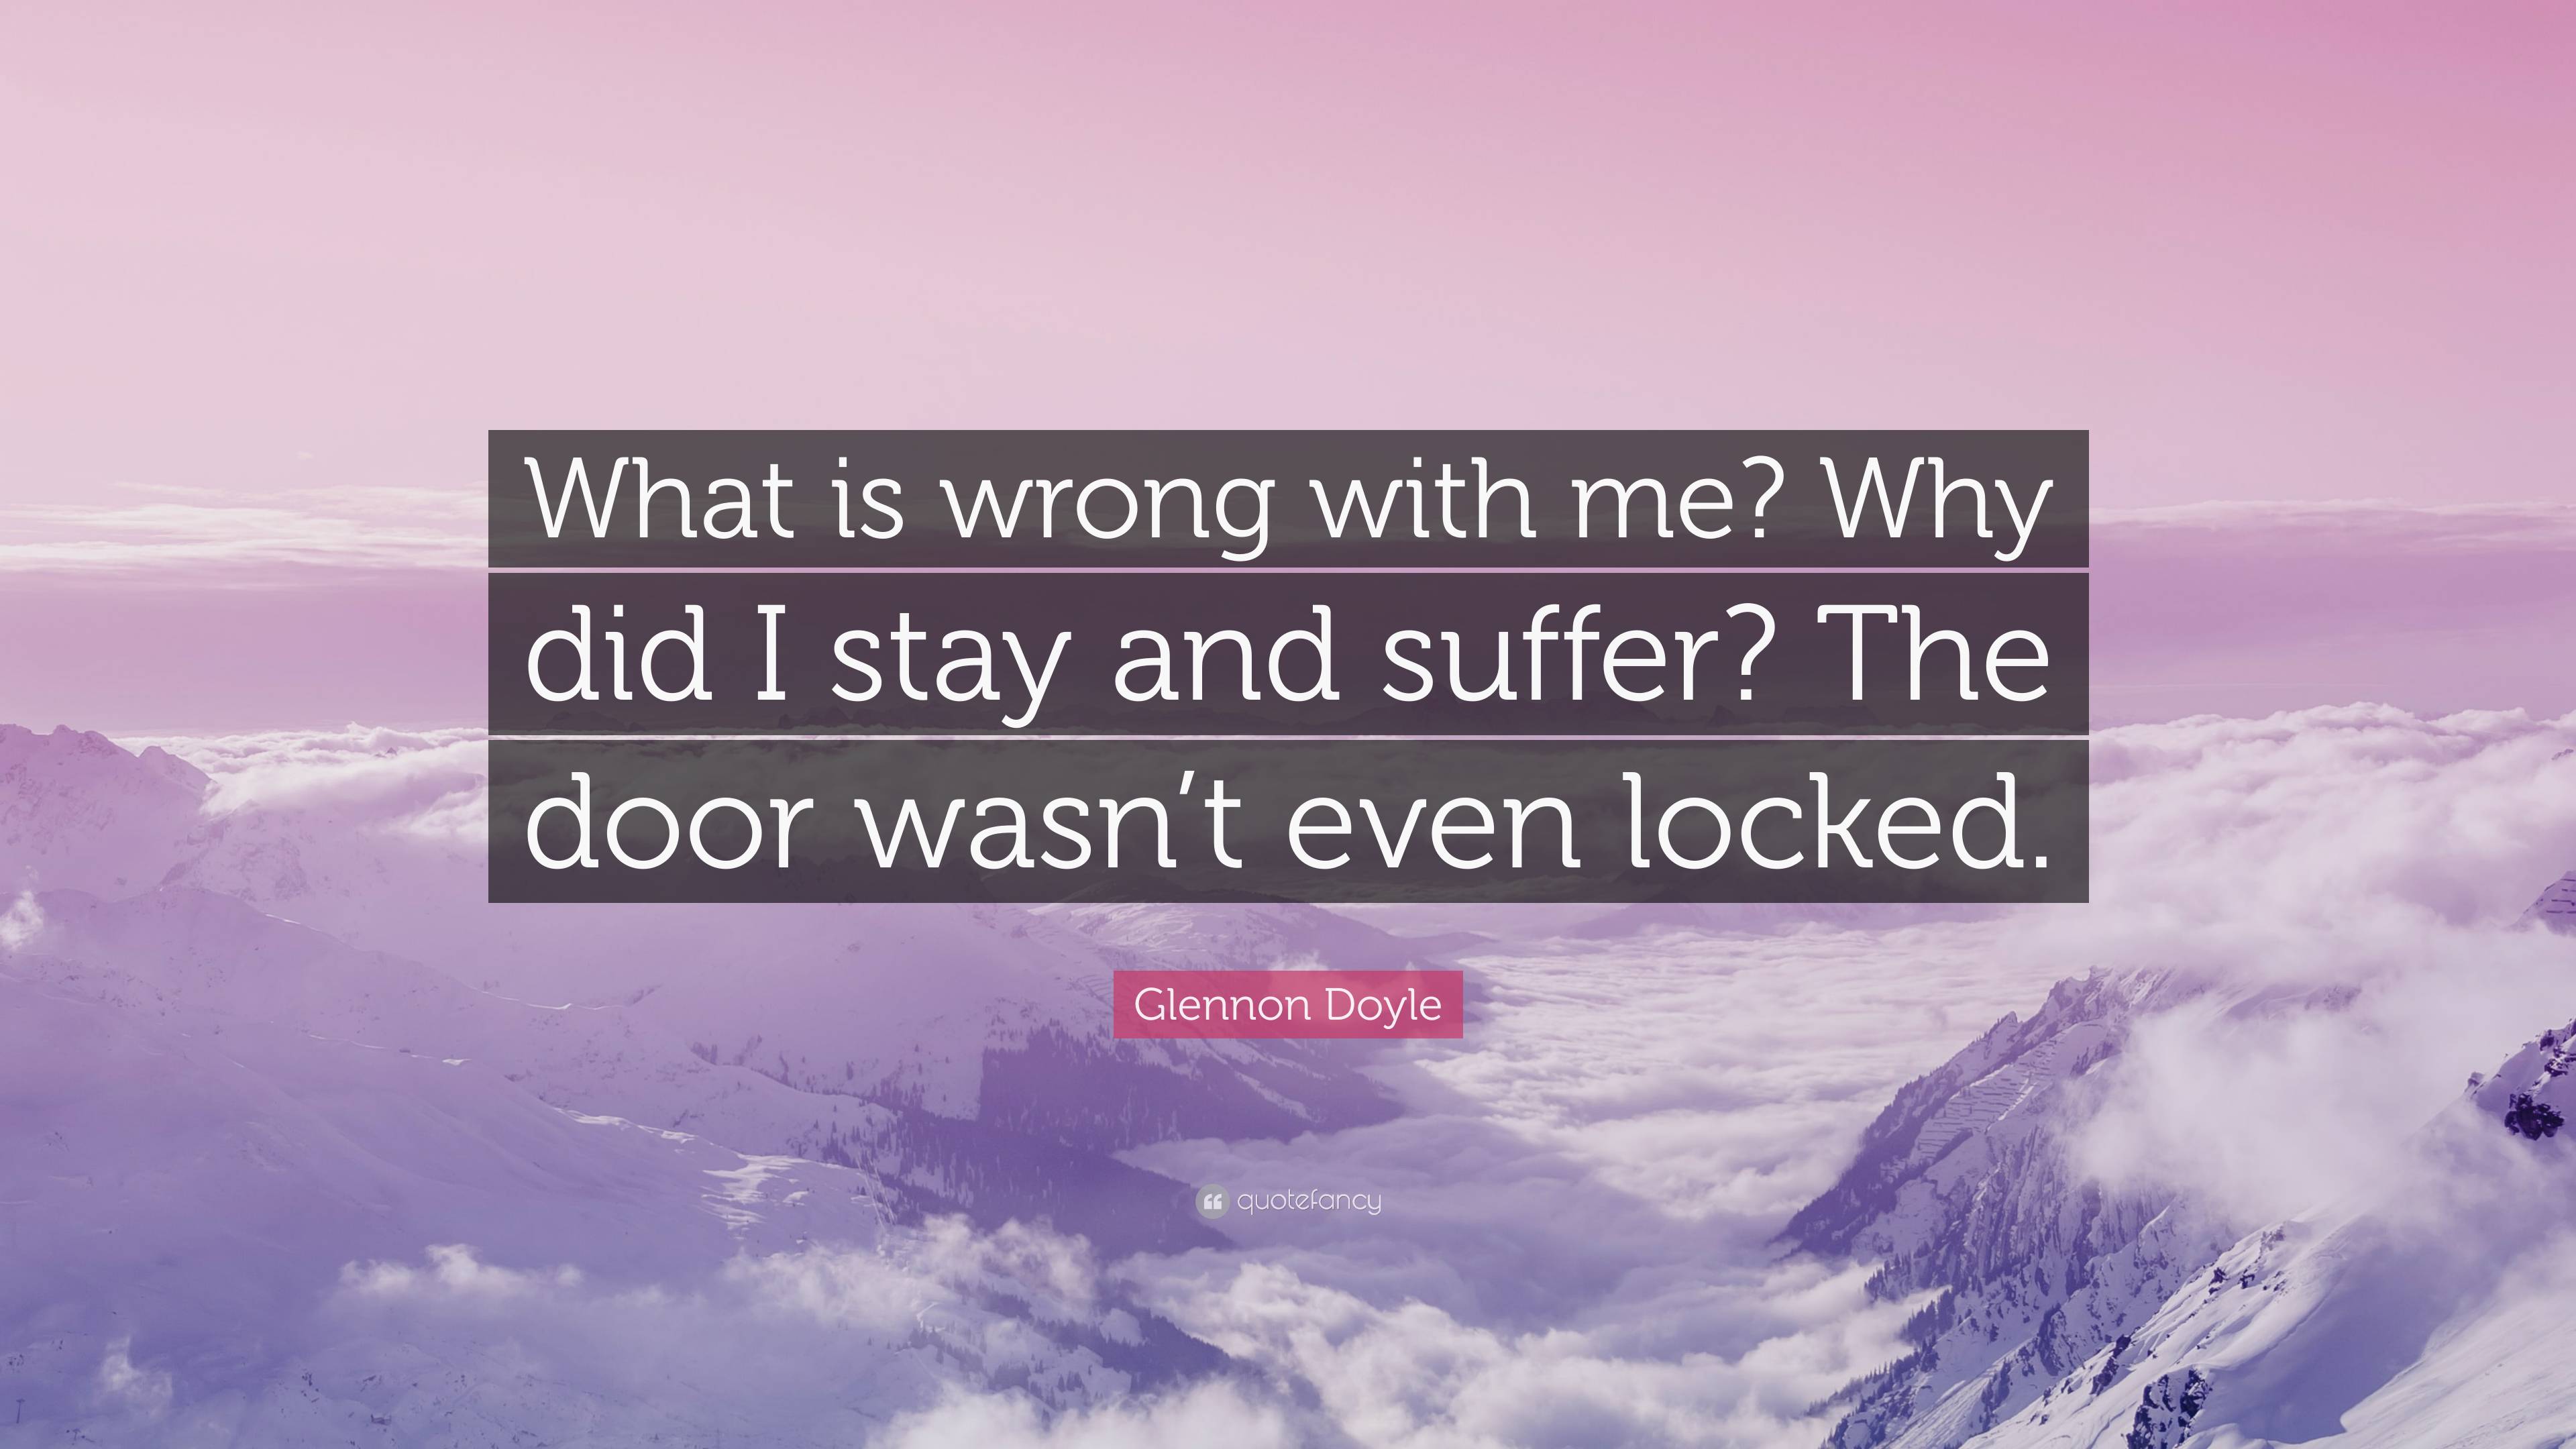 Glennon Doyle Quote: “What is wrong with me? Why did I stay and suffer ...